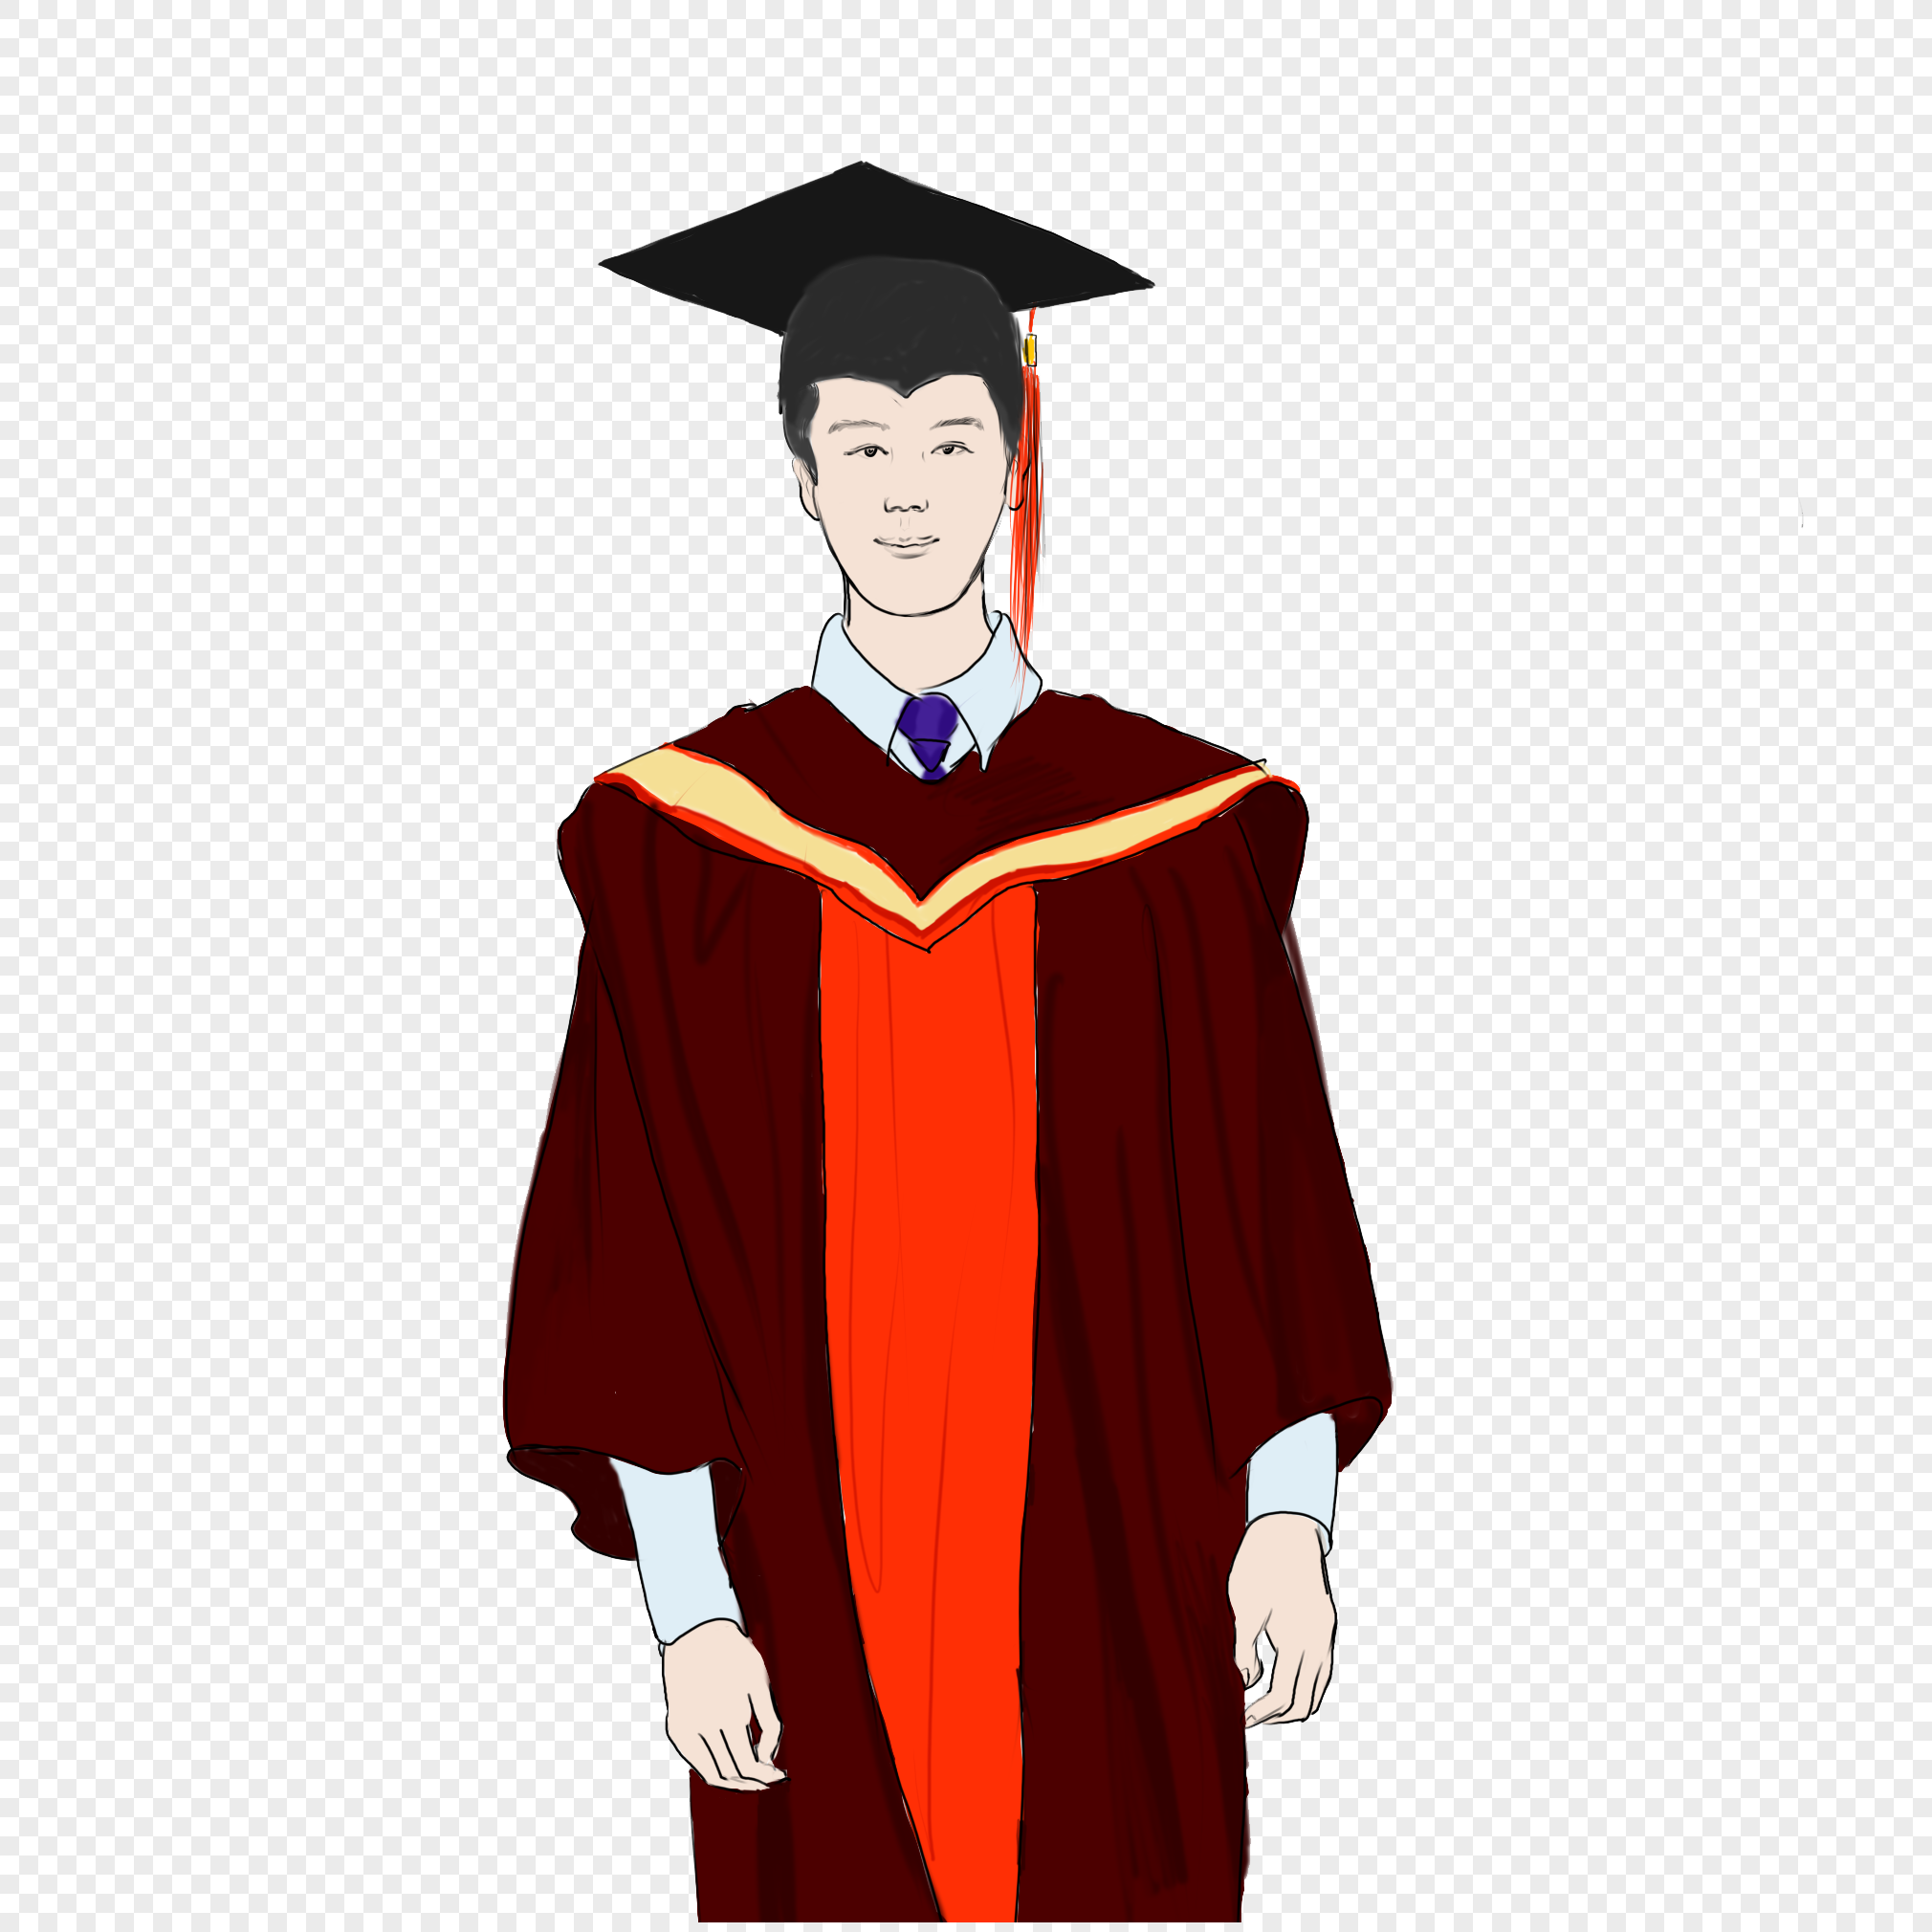 Graduation Gown Clipart Hd PNG, Graduates Wearing Graduation Gowns,  Graduation Season, Master Uniform, Character PNG Image For Free Download